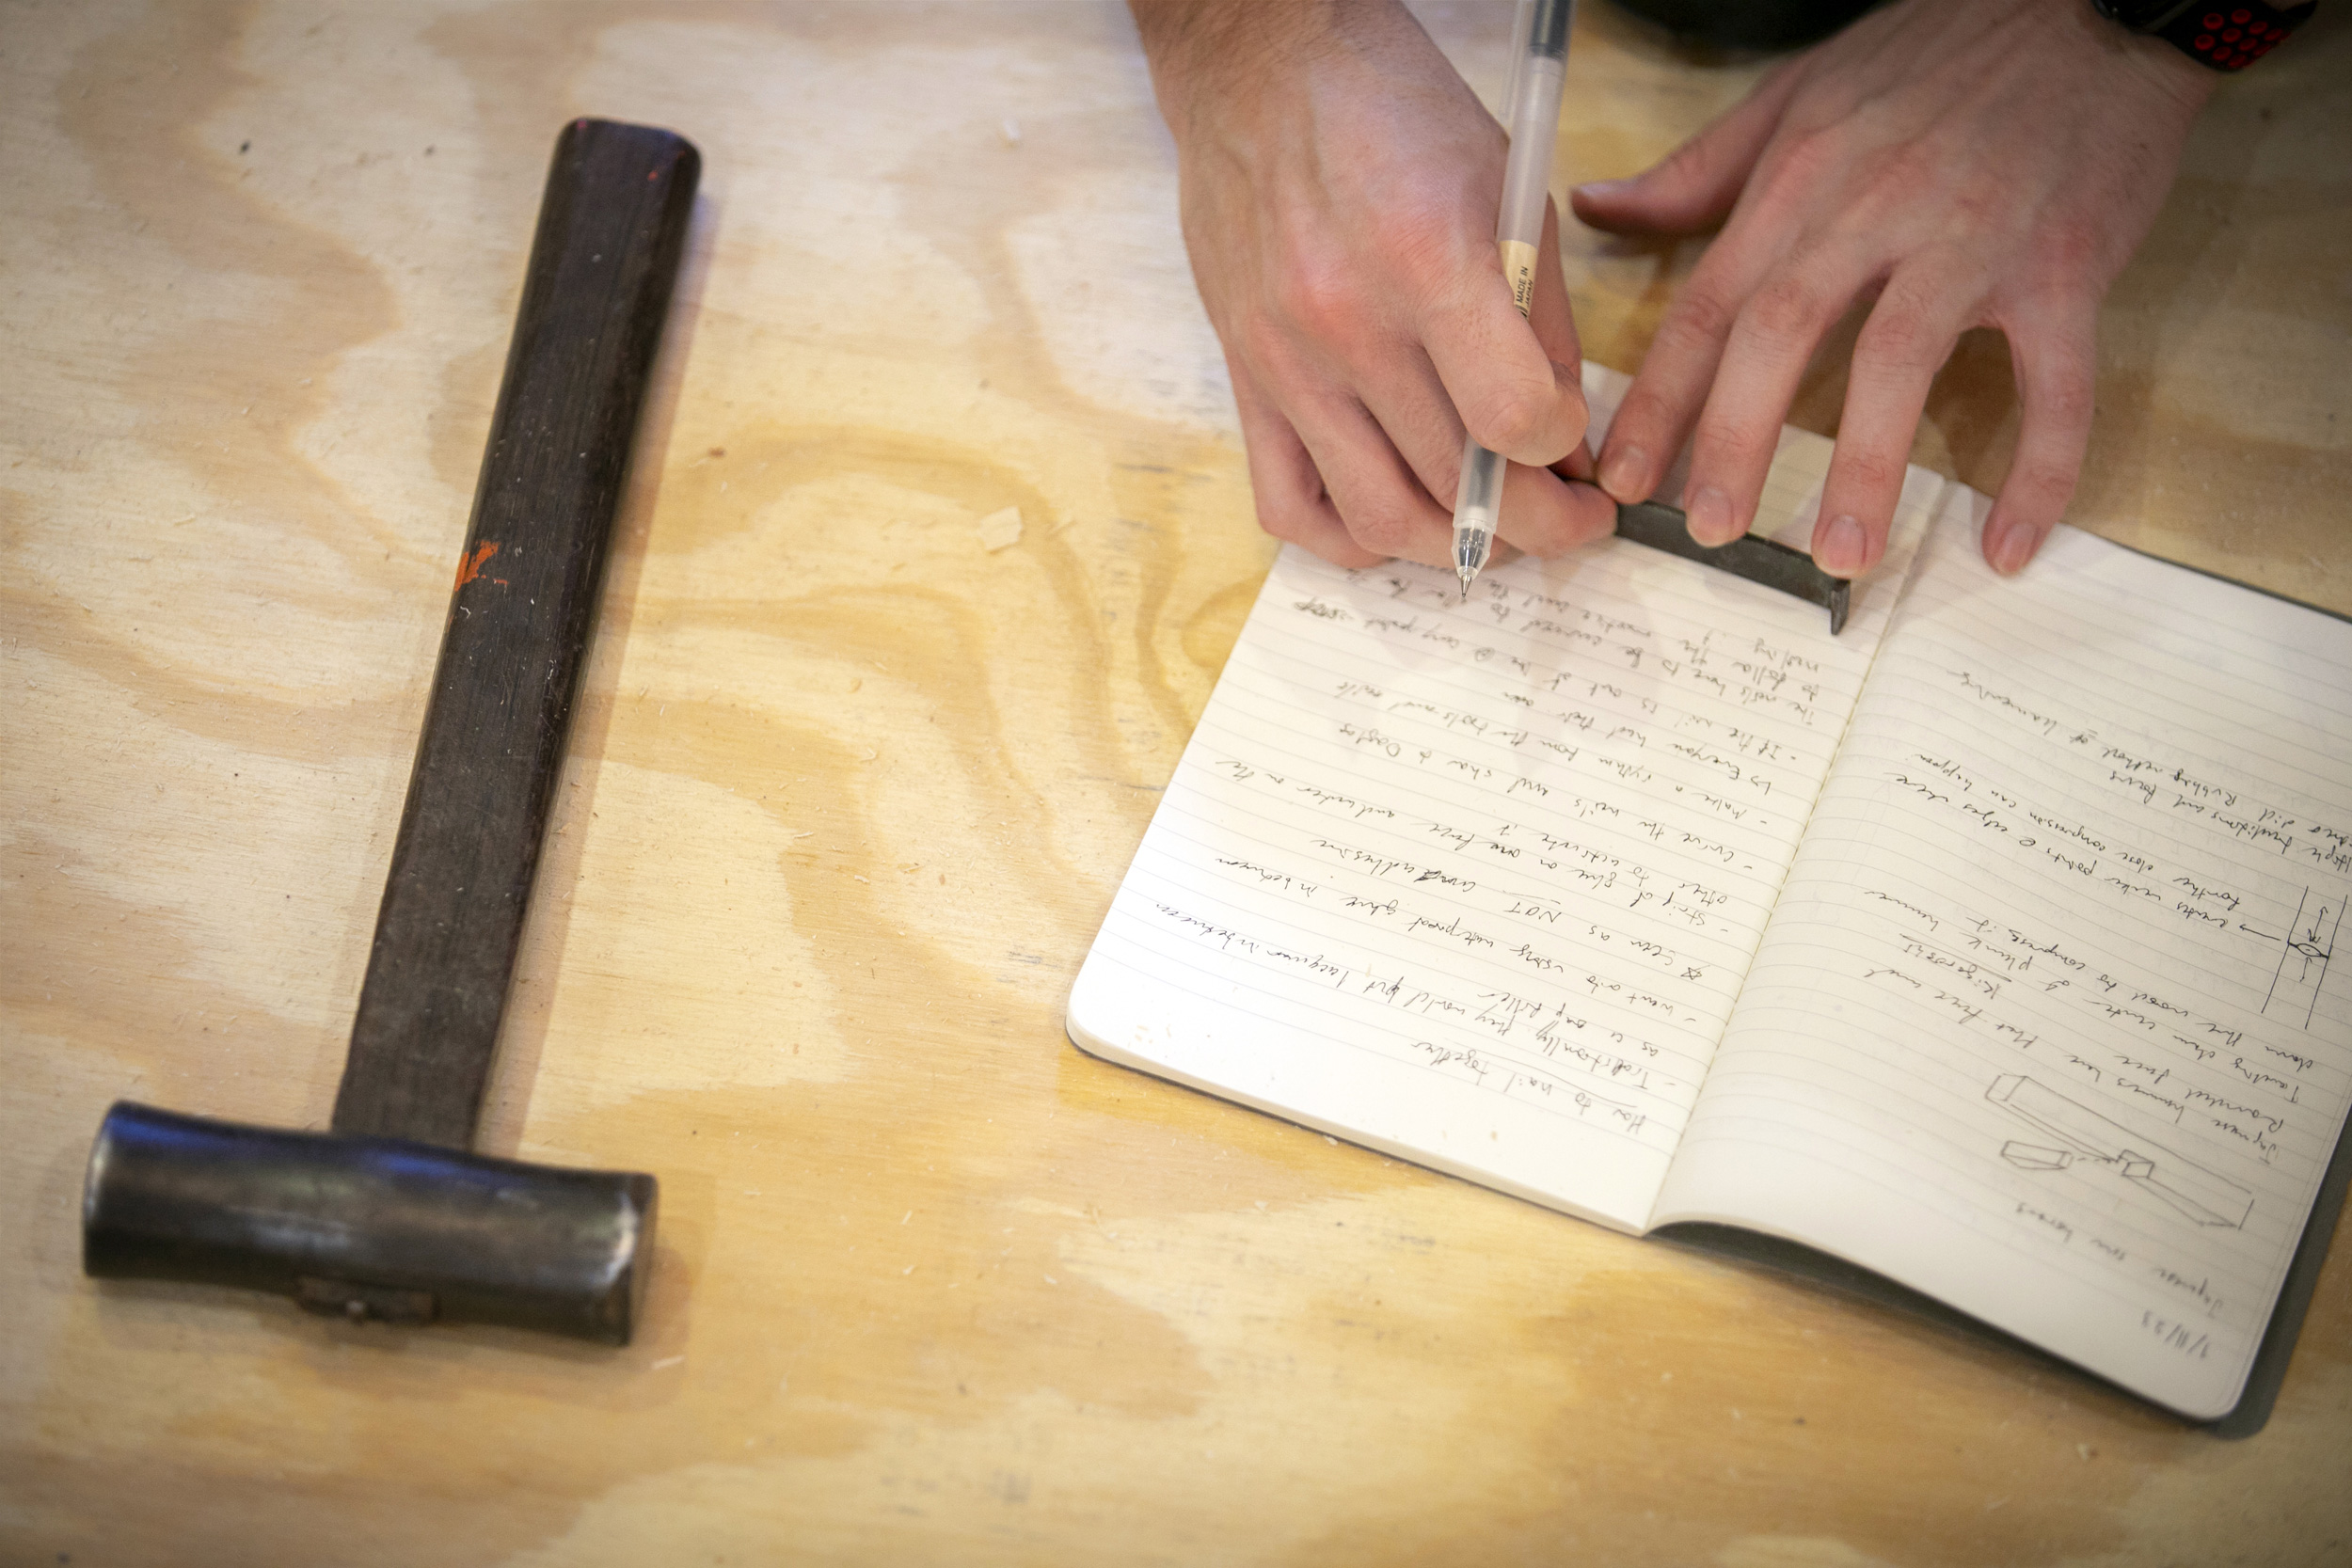 Hensch marks the shape in his journal as a record of the correct form.